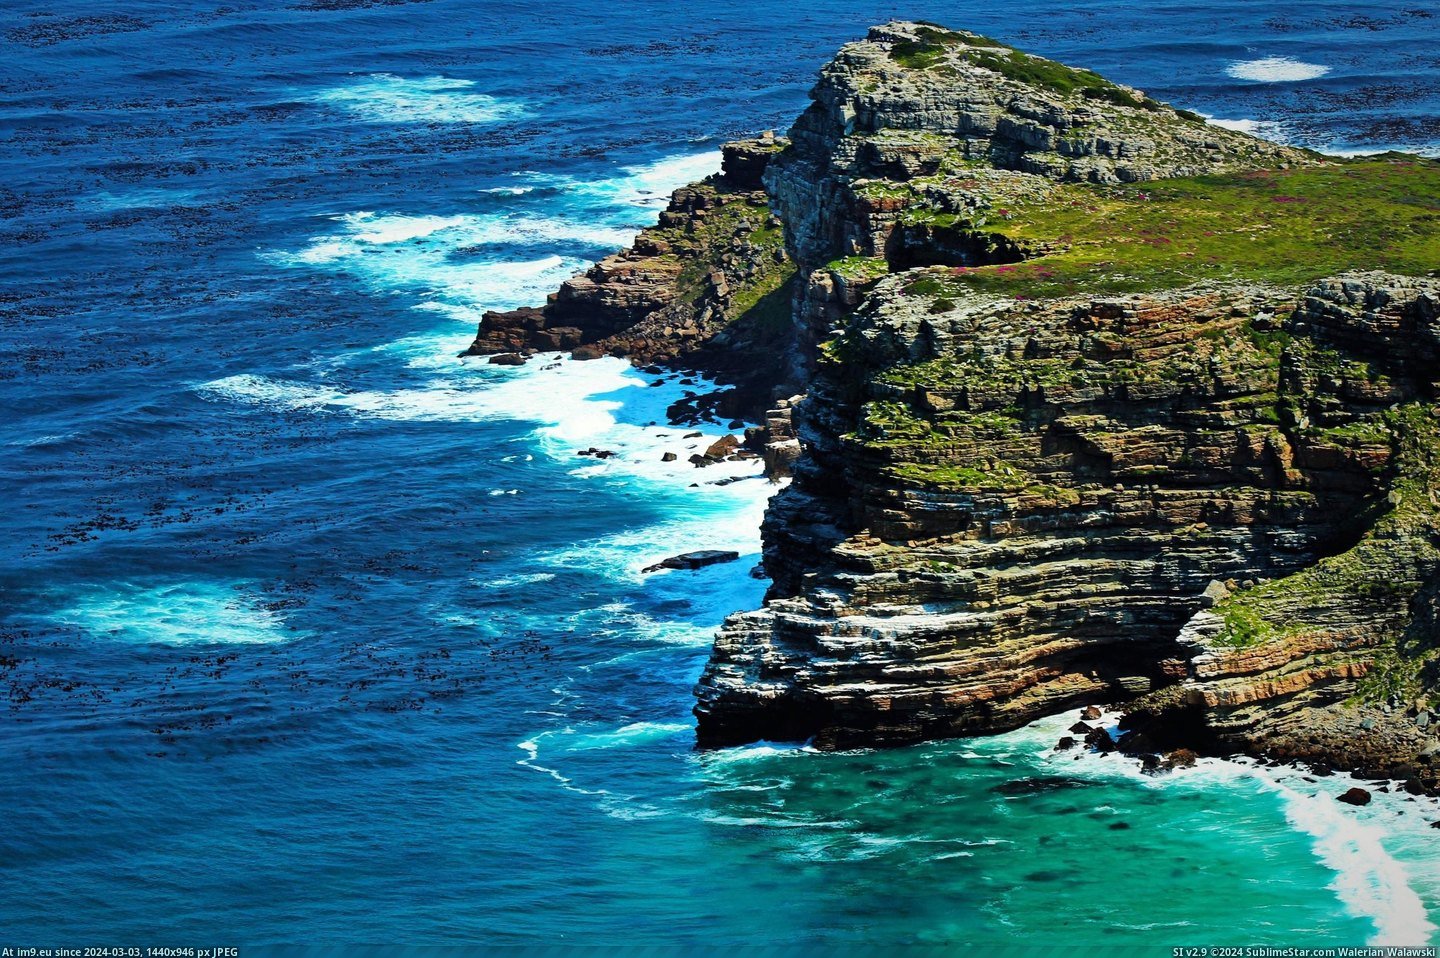 #Good #Beautiful #May #Africa #Cape #Southern #Tip #Hope #South #Place [Earthporn] Cape of Good Hope may not be the most southern tip of Africa but it is indeed a beautiful place, South Africa  [2603 Pic. (Bild von album My r/EARTHPORN favs))